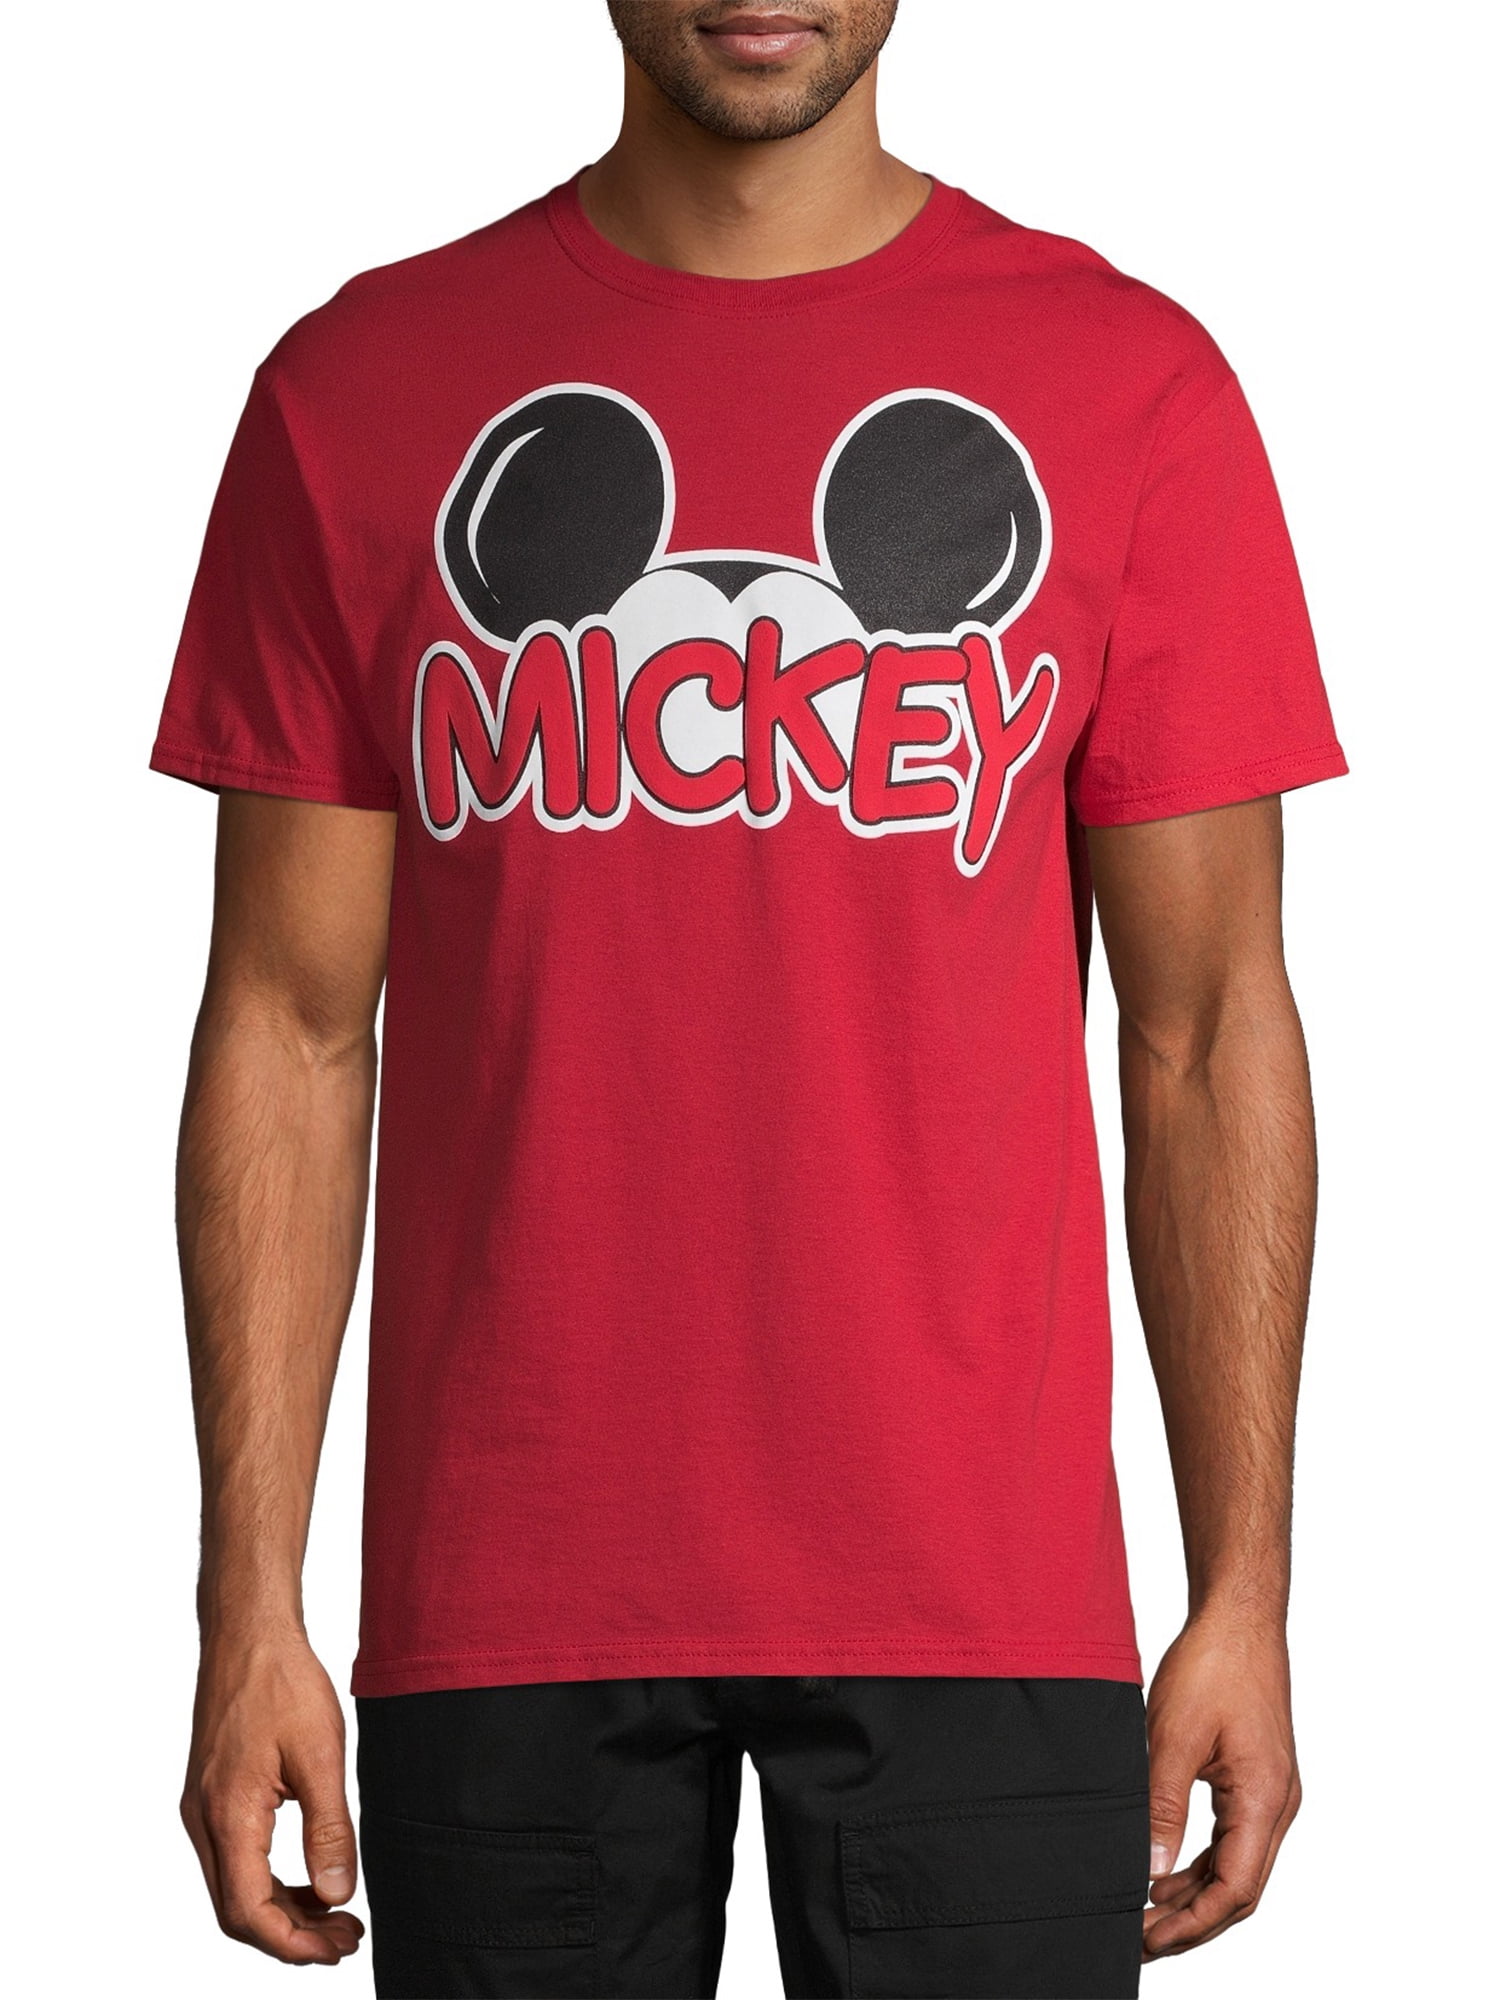 Disney Mickey Mouse Signature Ears T-Shirt-XLarge Family